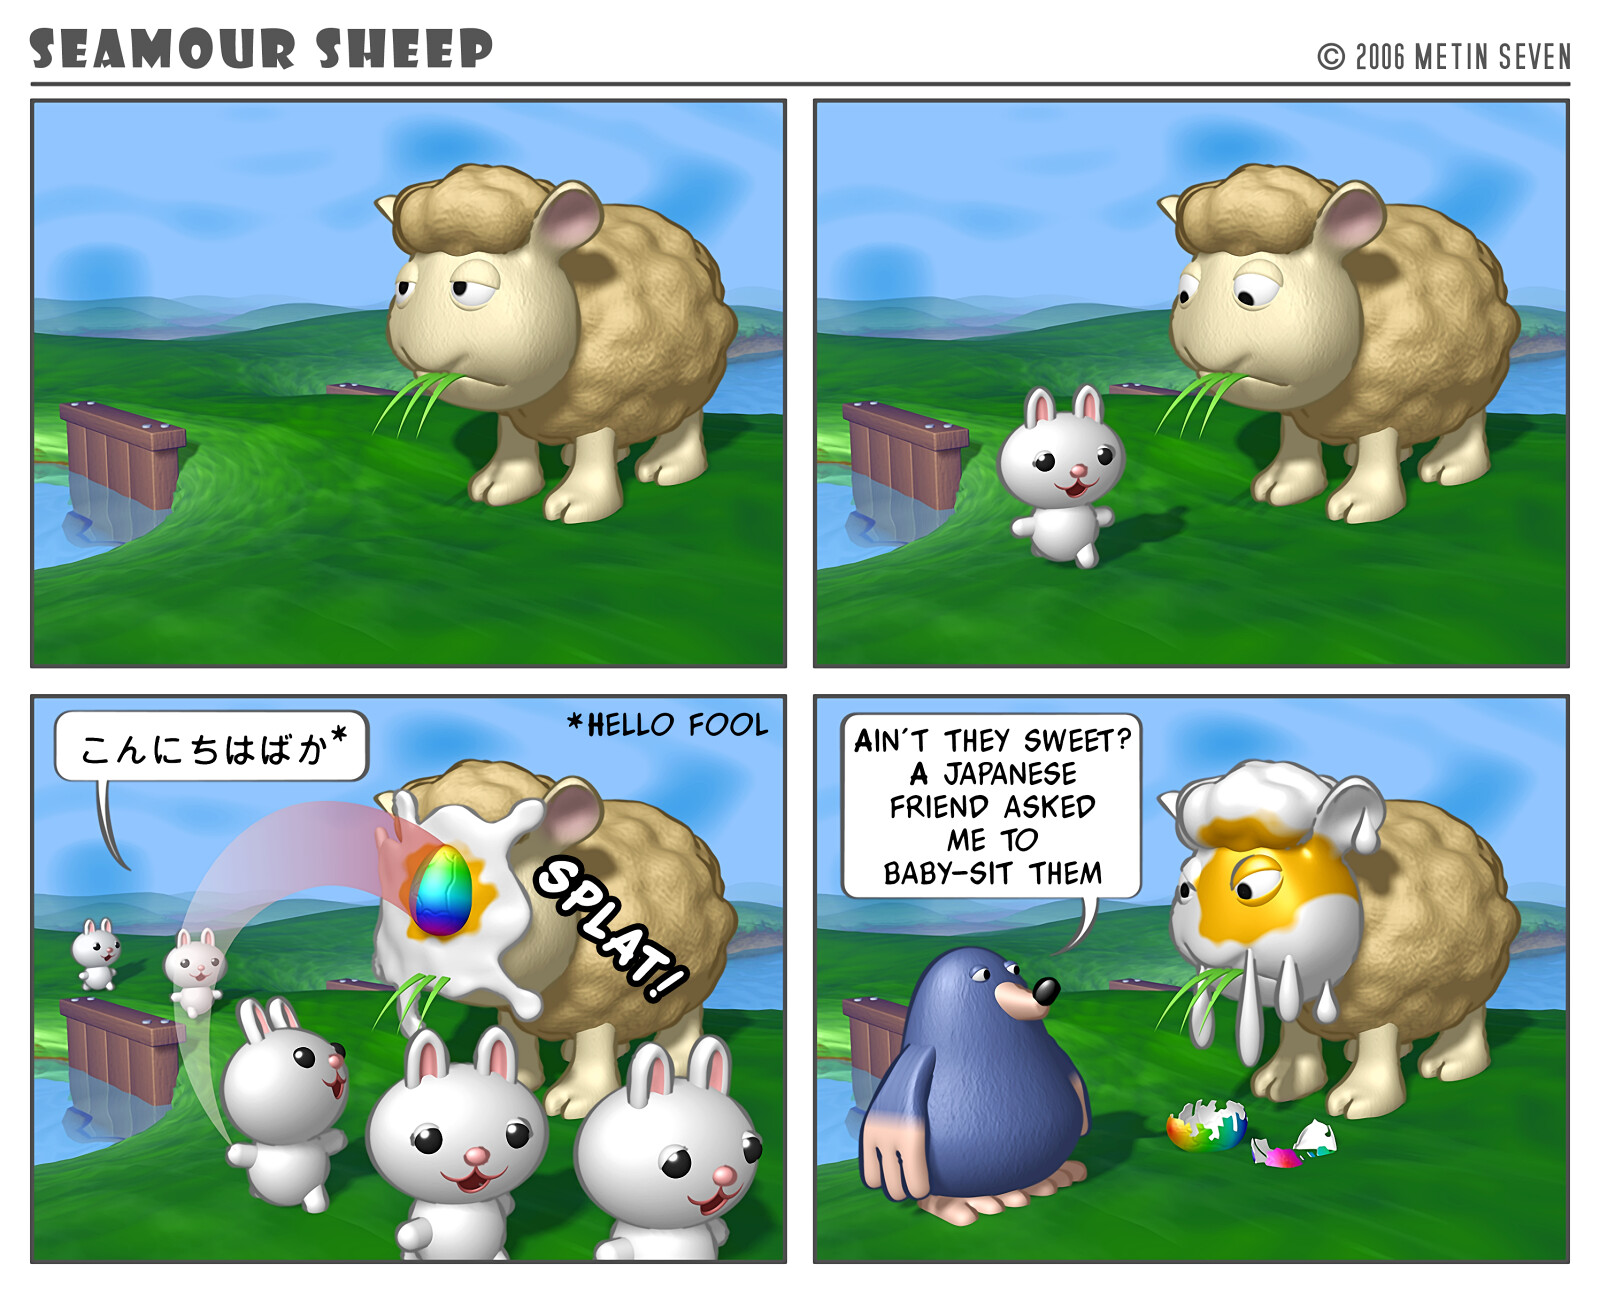 Seamour Sheep and Marty Mole comic strip episode: Easter